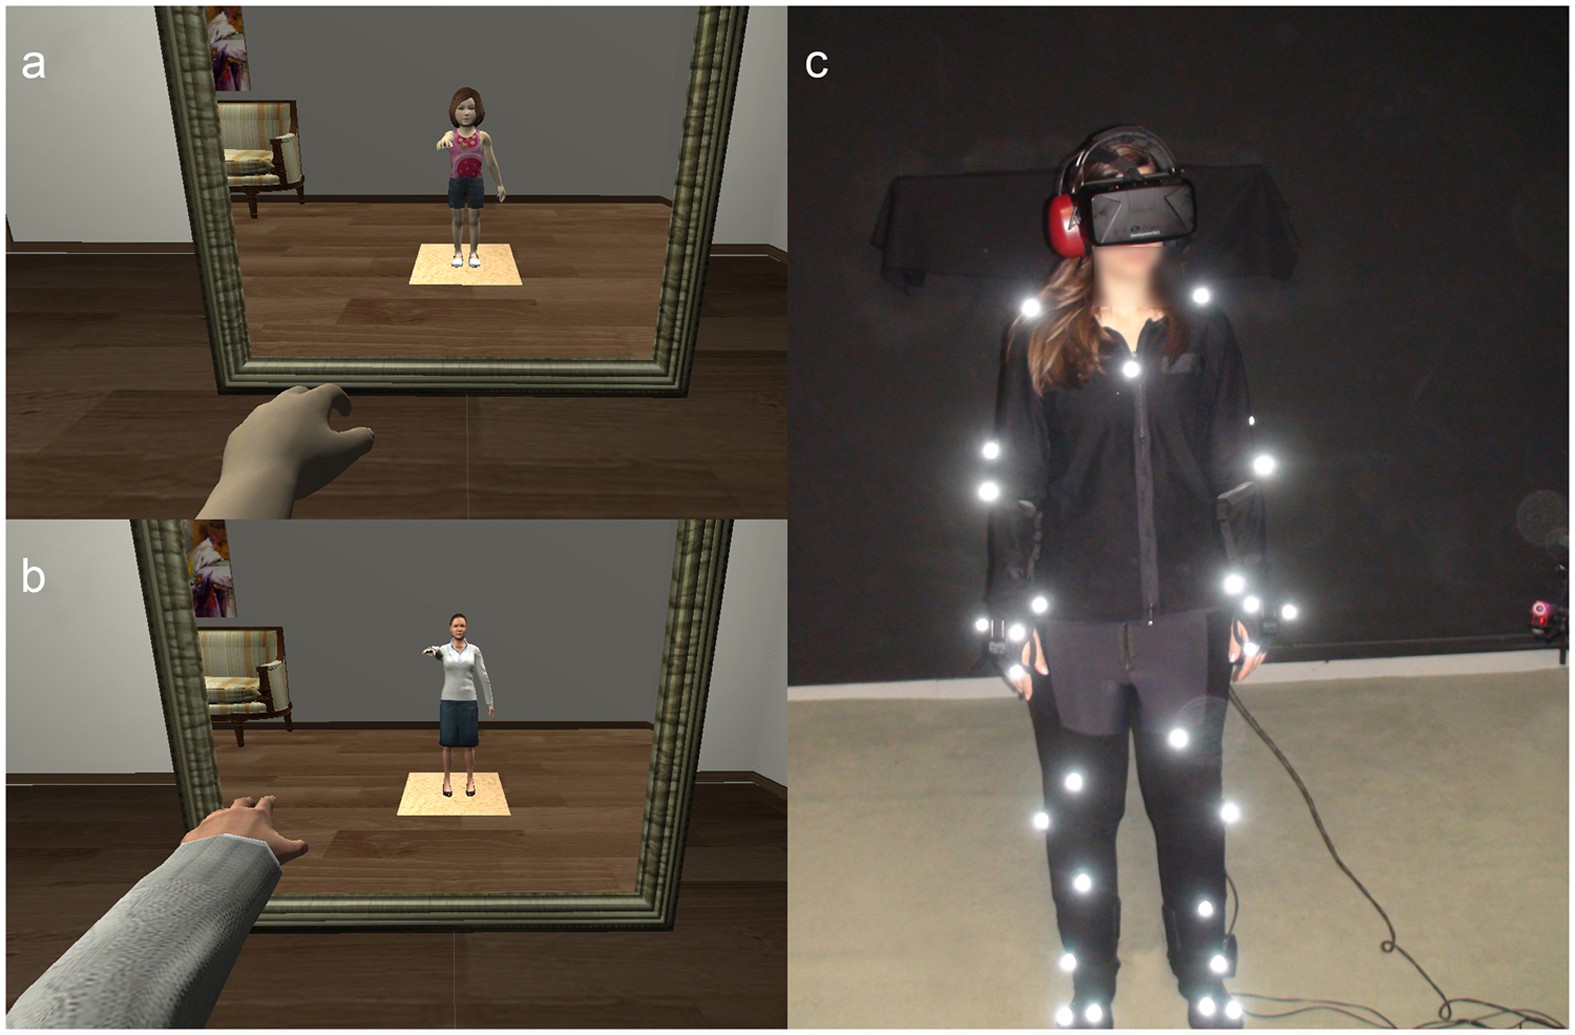 Bibliografi Madison bekvemmelighed Embodiment in a Child-Like Talking Virtual Body Influences Object Size  Perception, Self-Identification, and Subsequent Real Speaking | Scientific  Reports